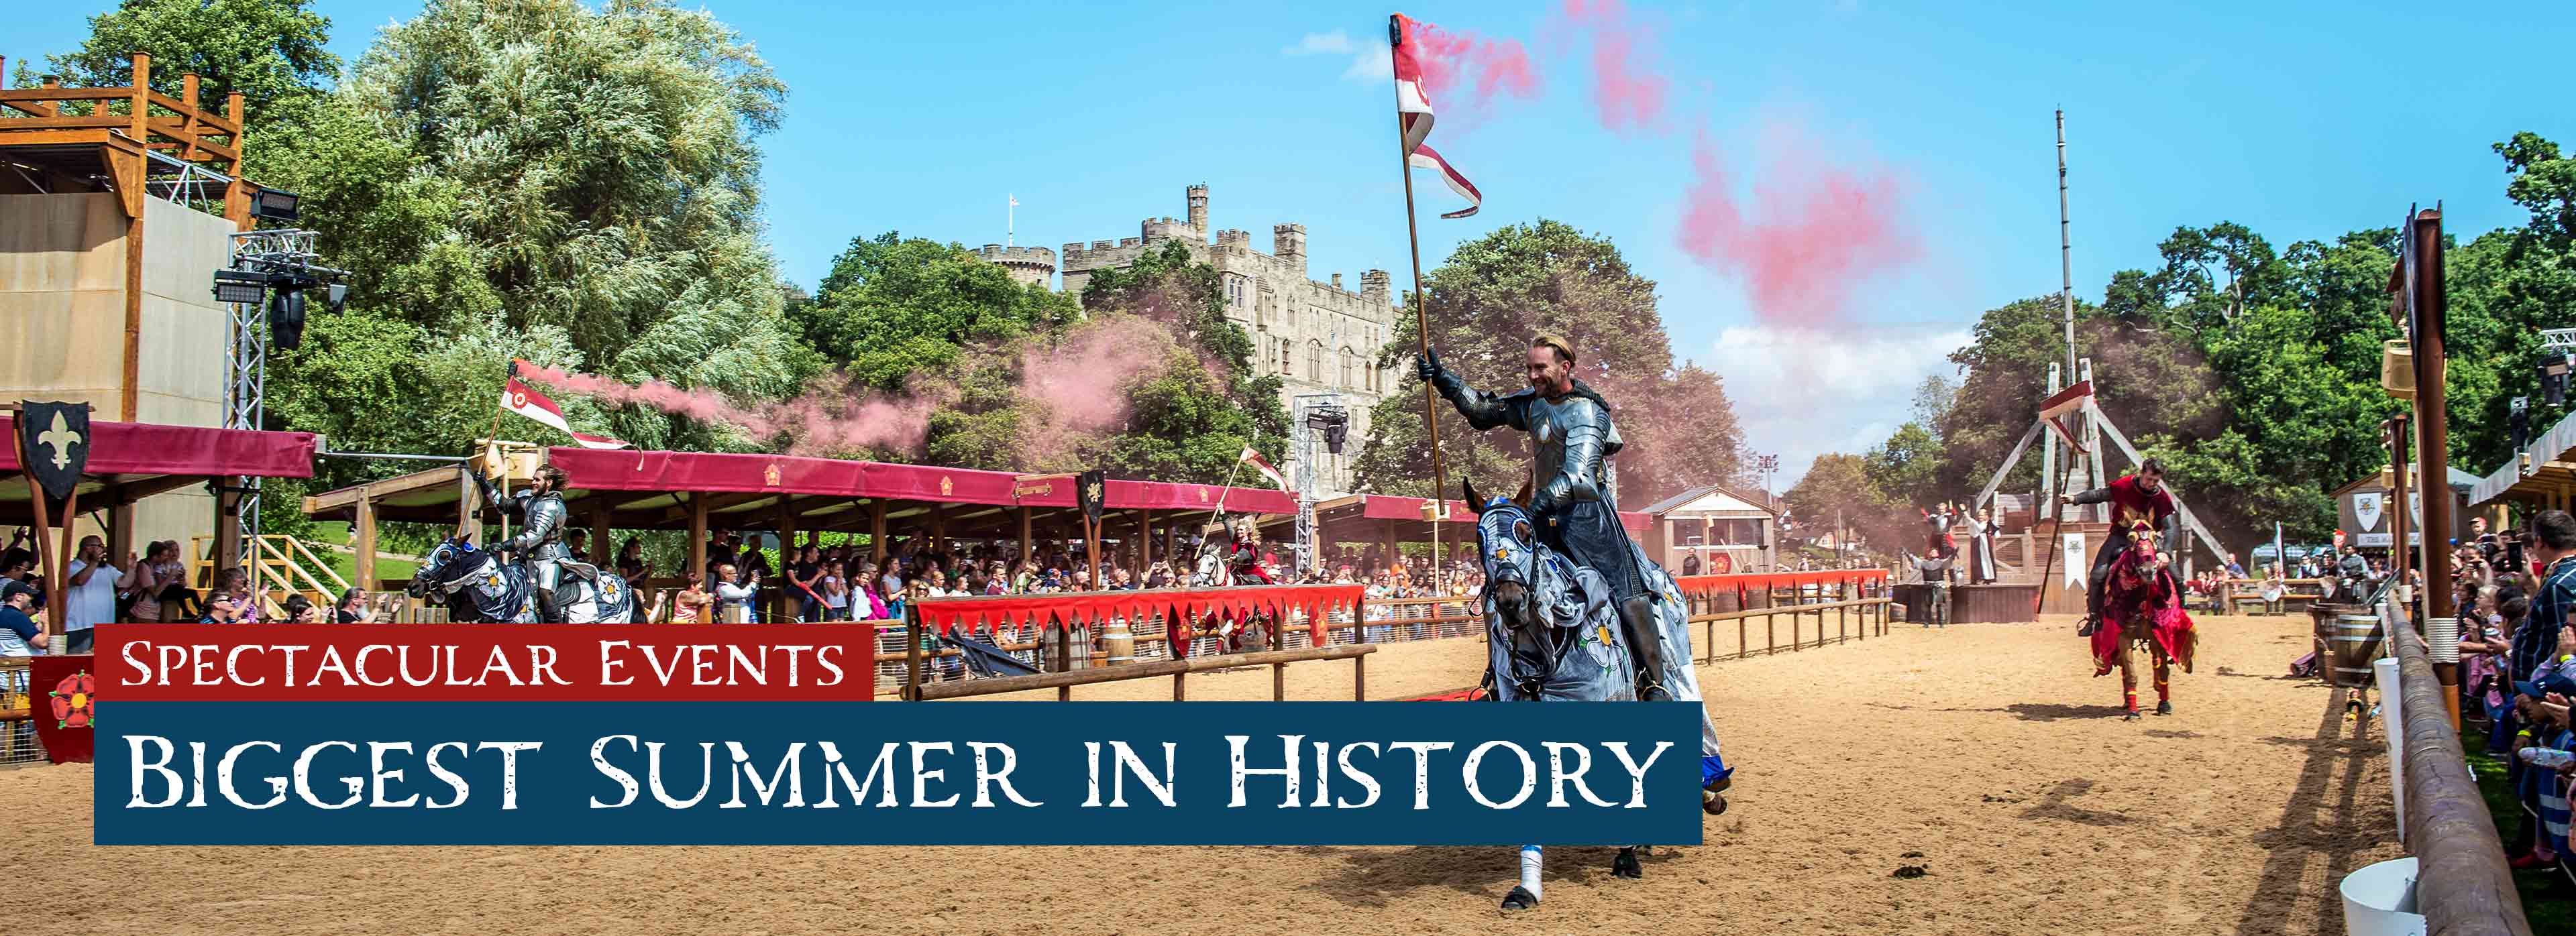 Biggest Summer in History at Warwick Castle